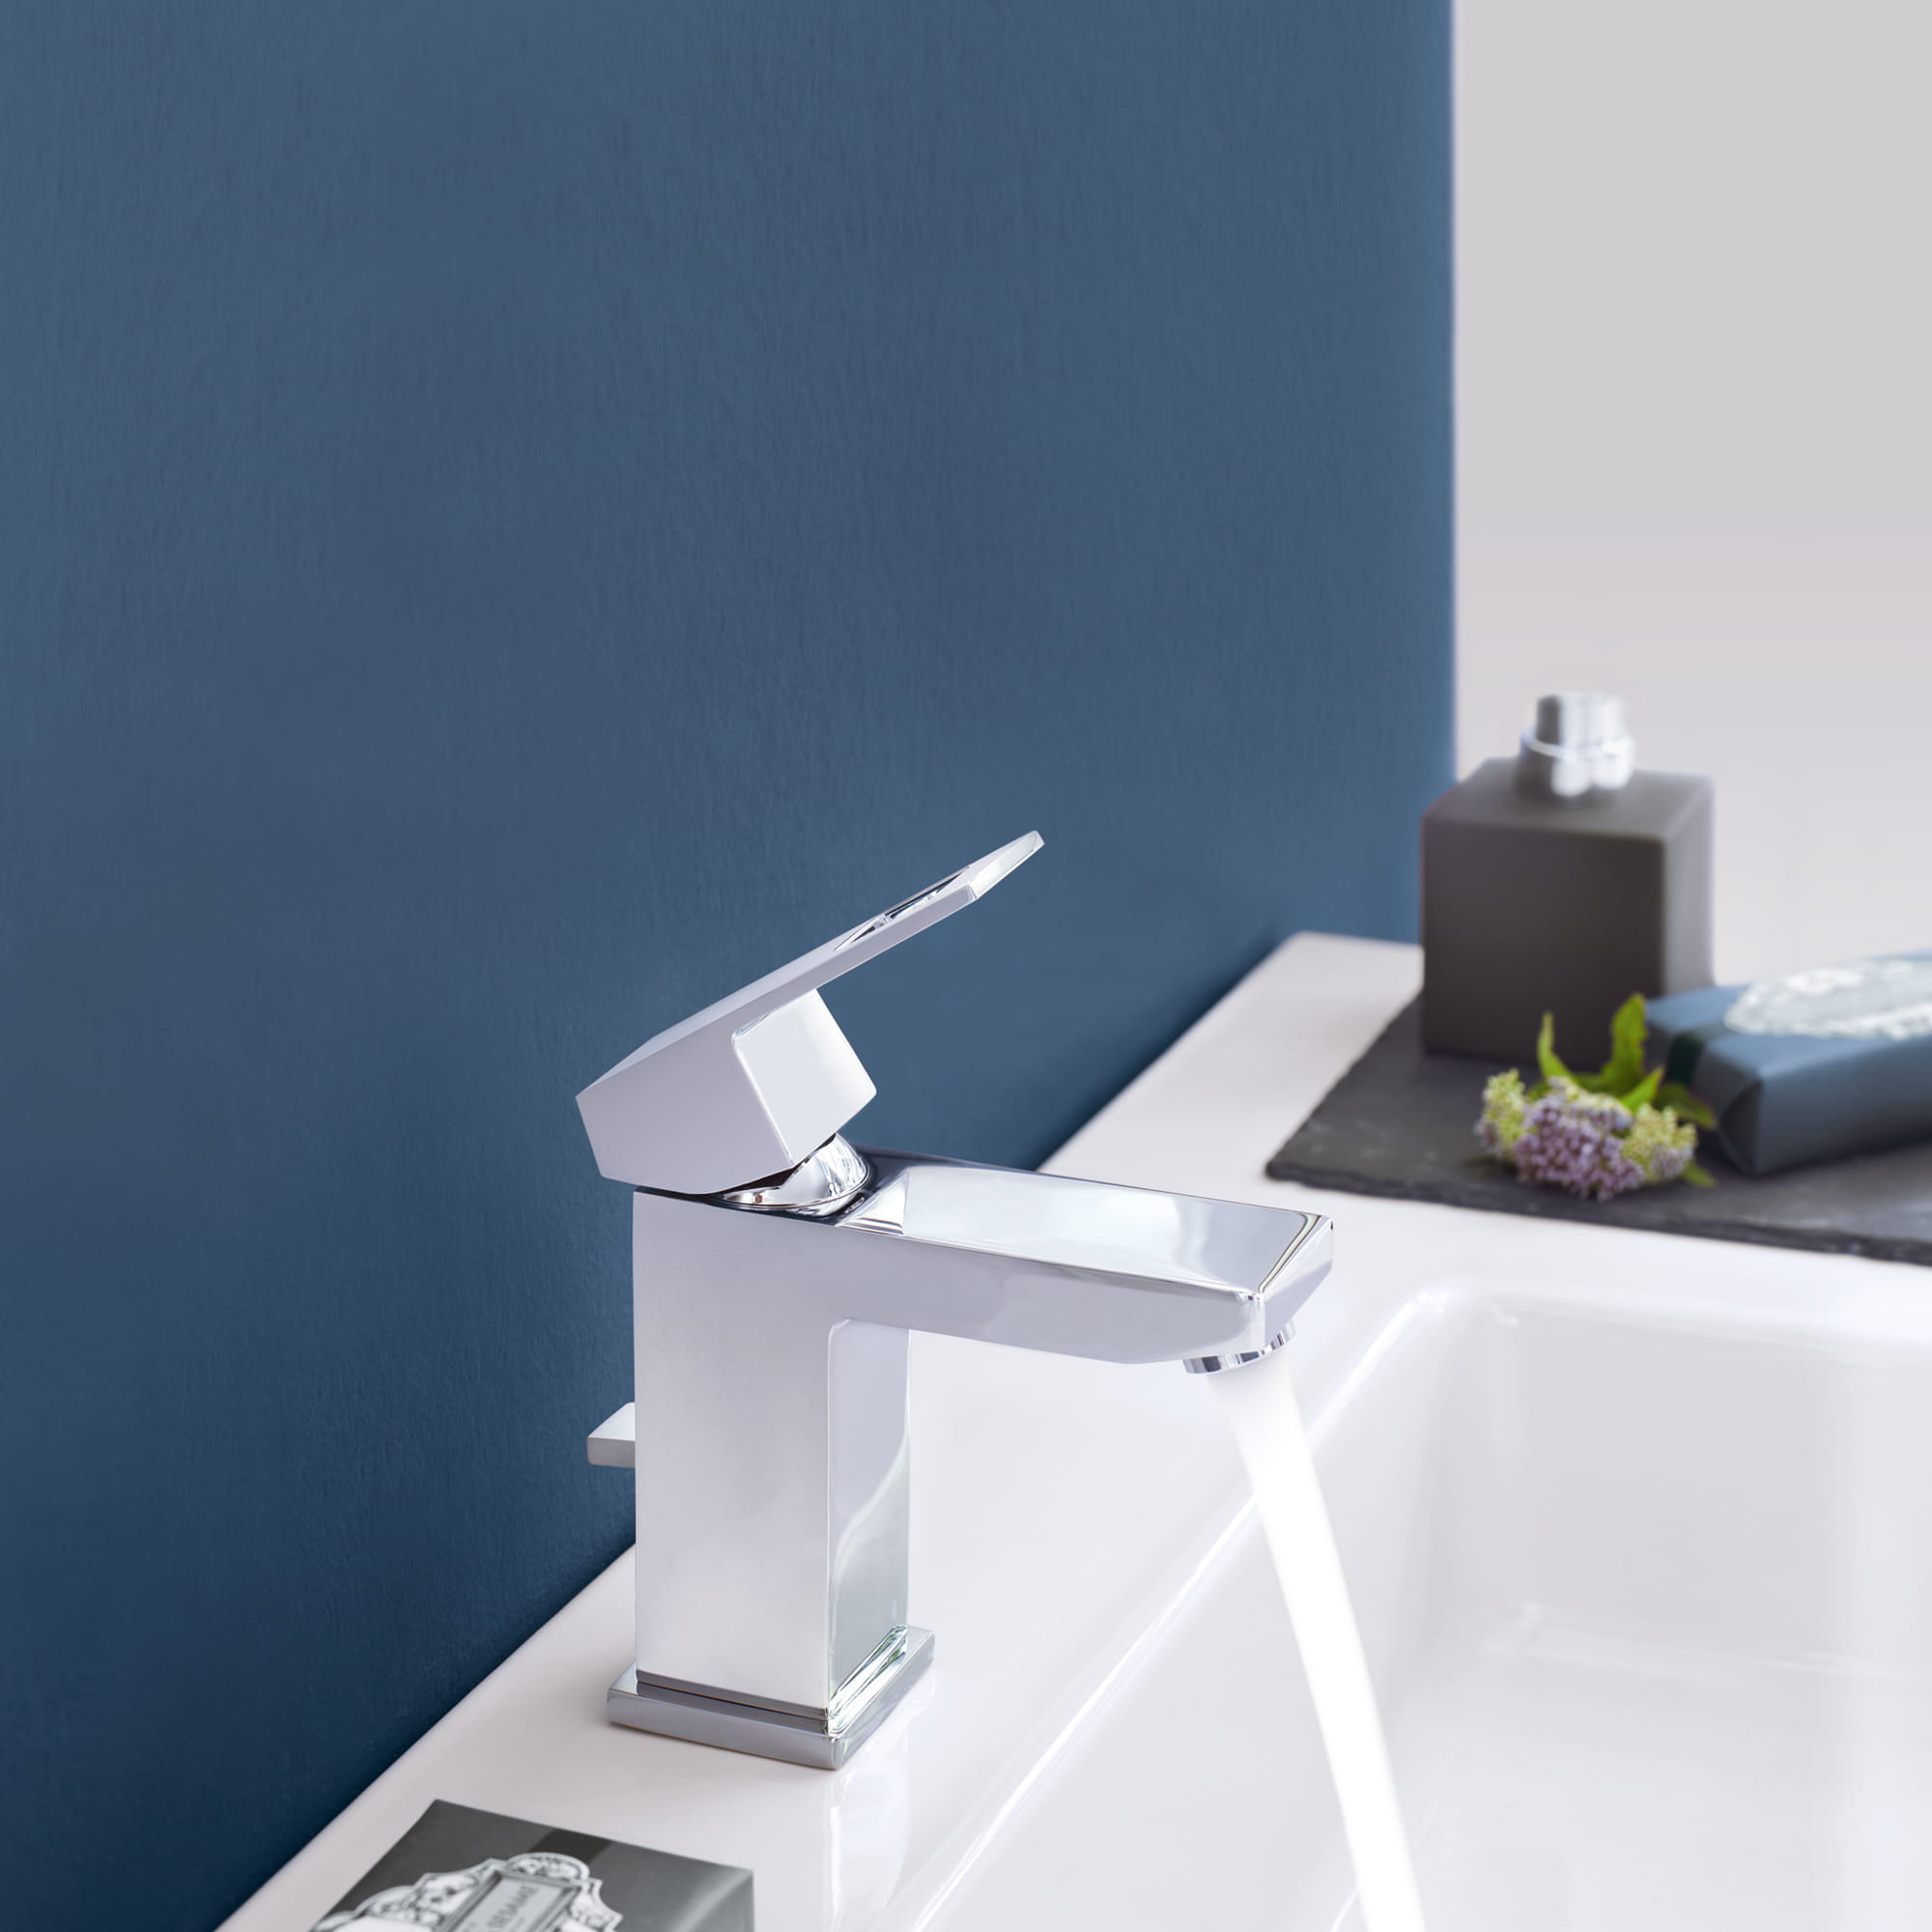 GROHE Eurocube Faucet with blue background